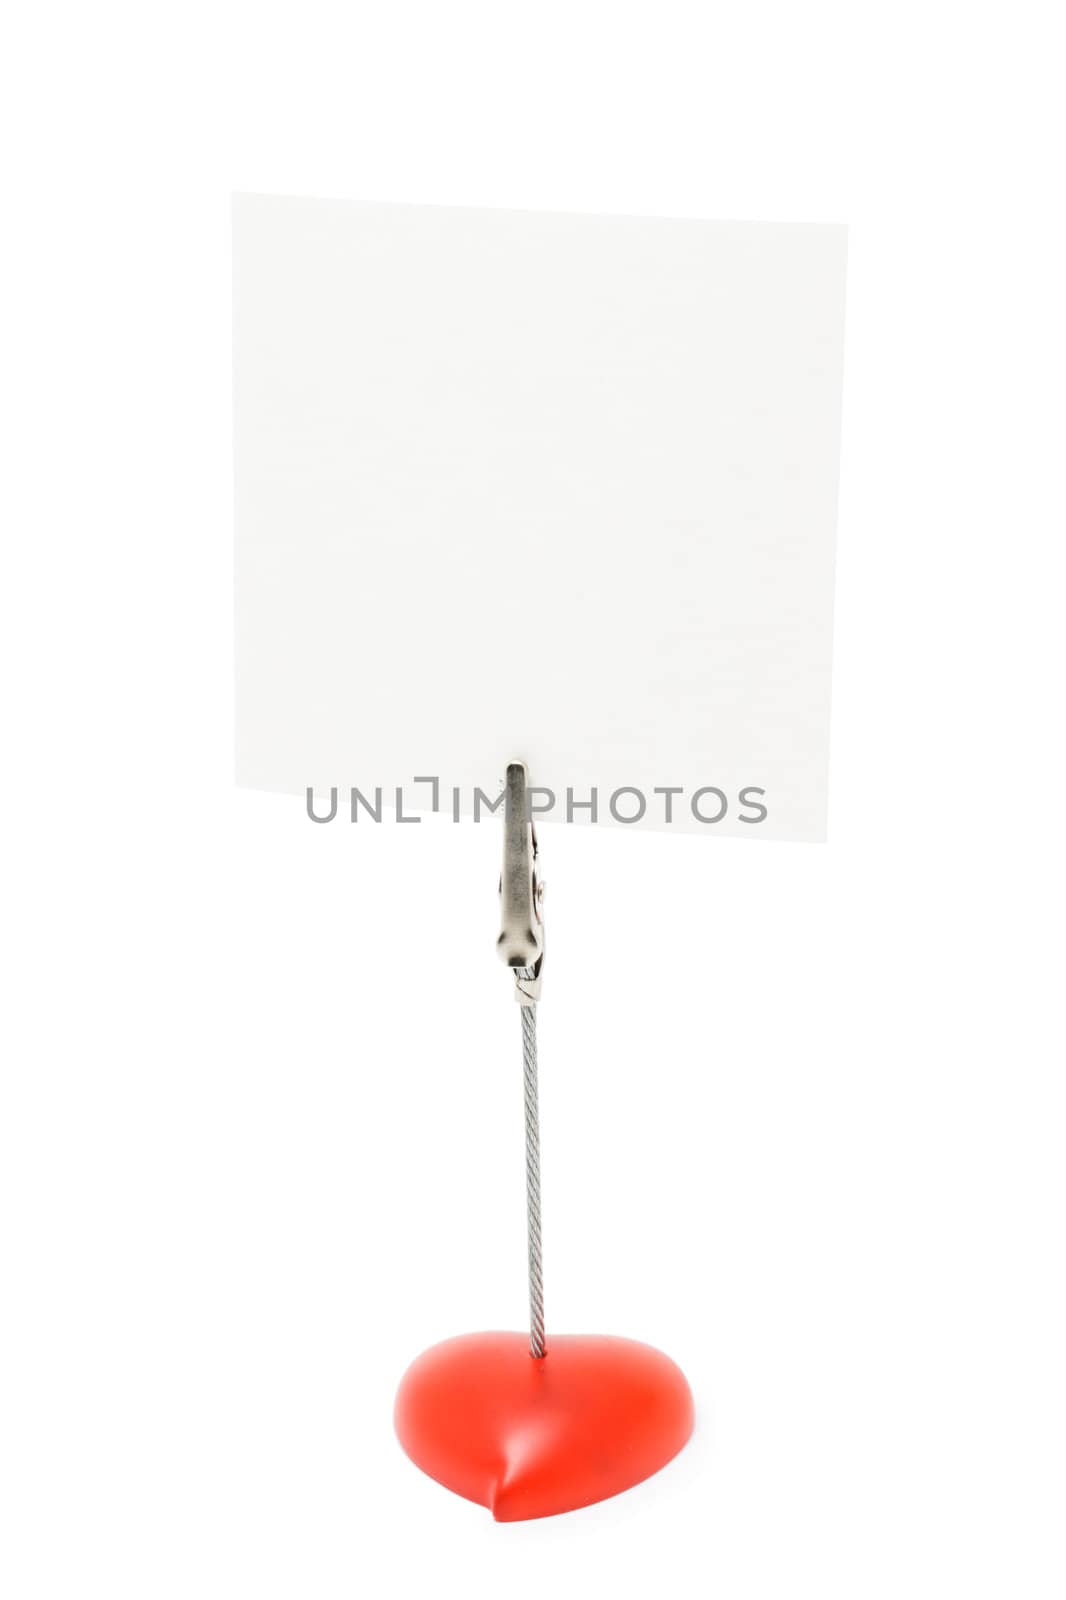 Blank note stand with heart shaped base isolatedon white background